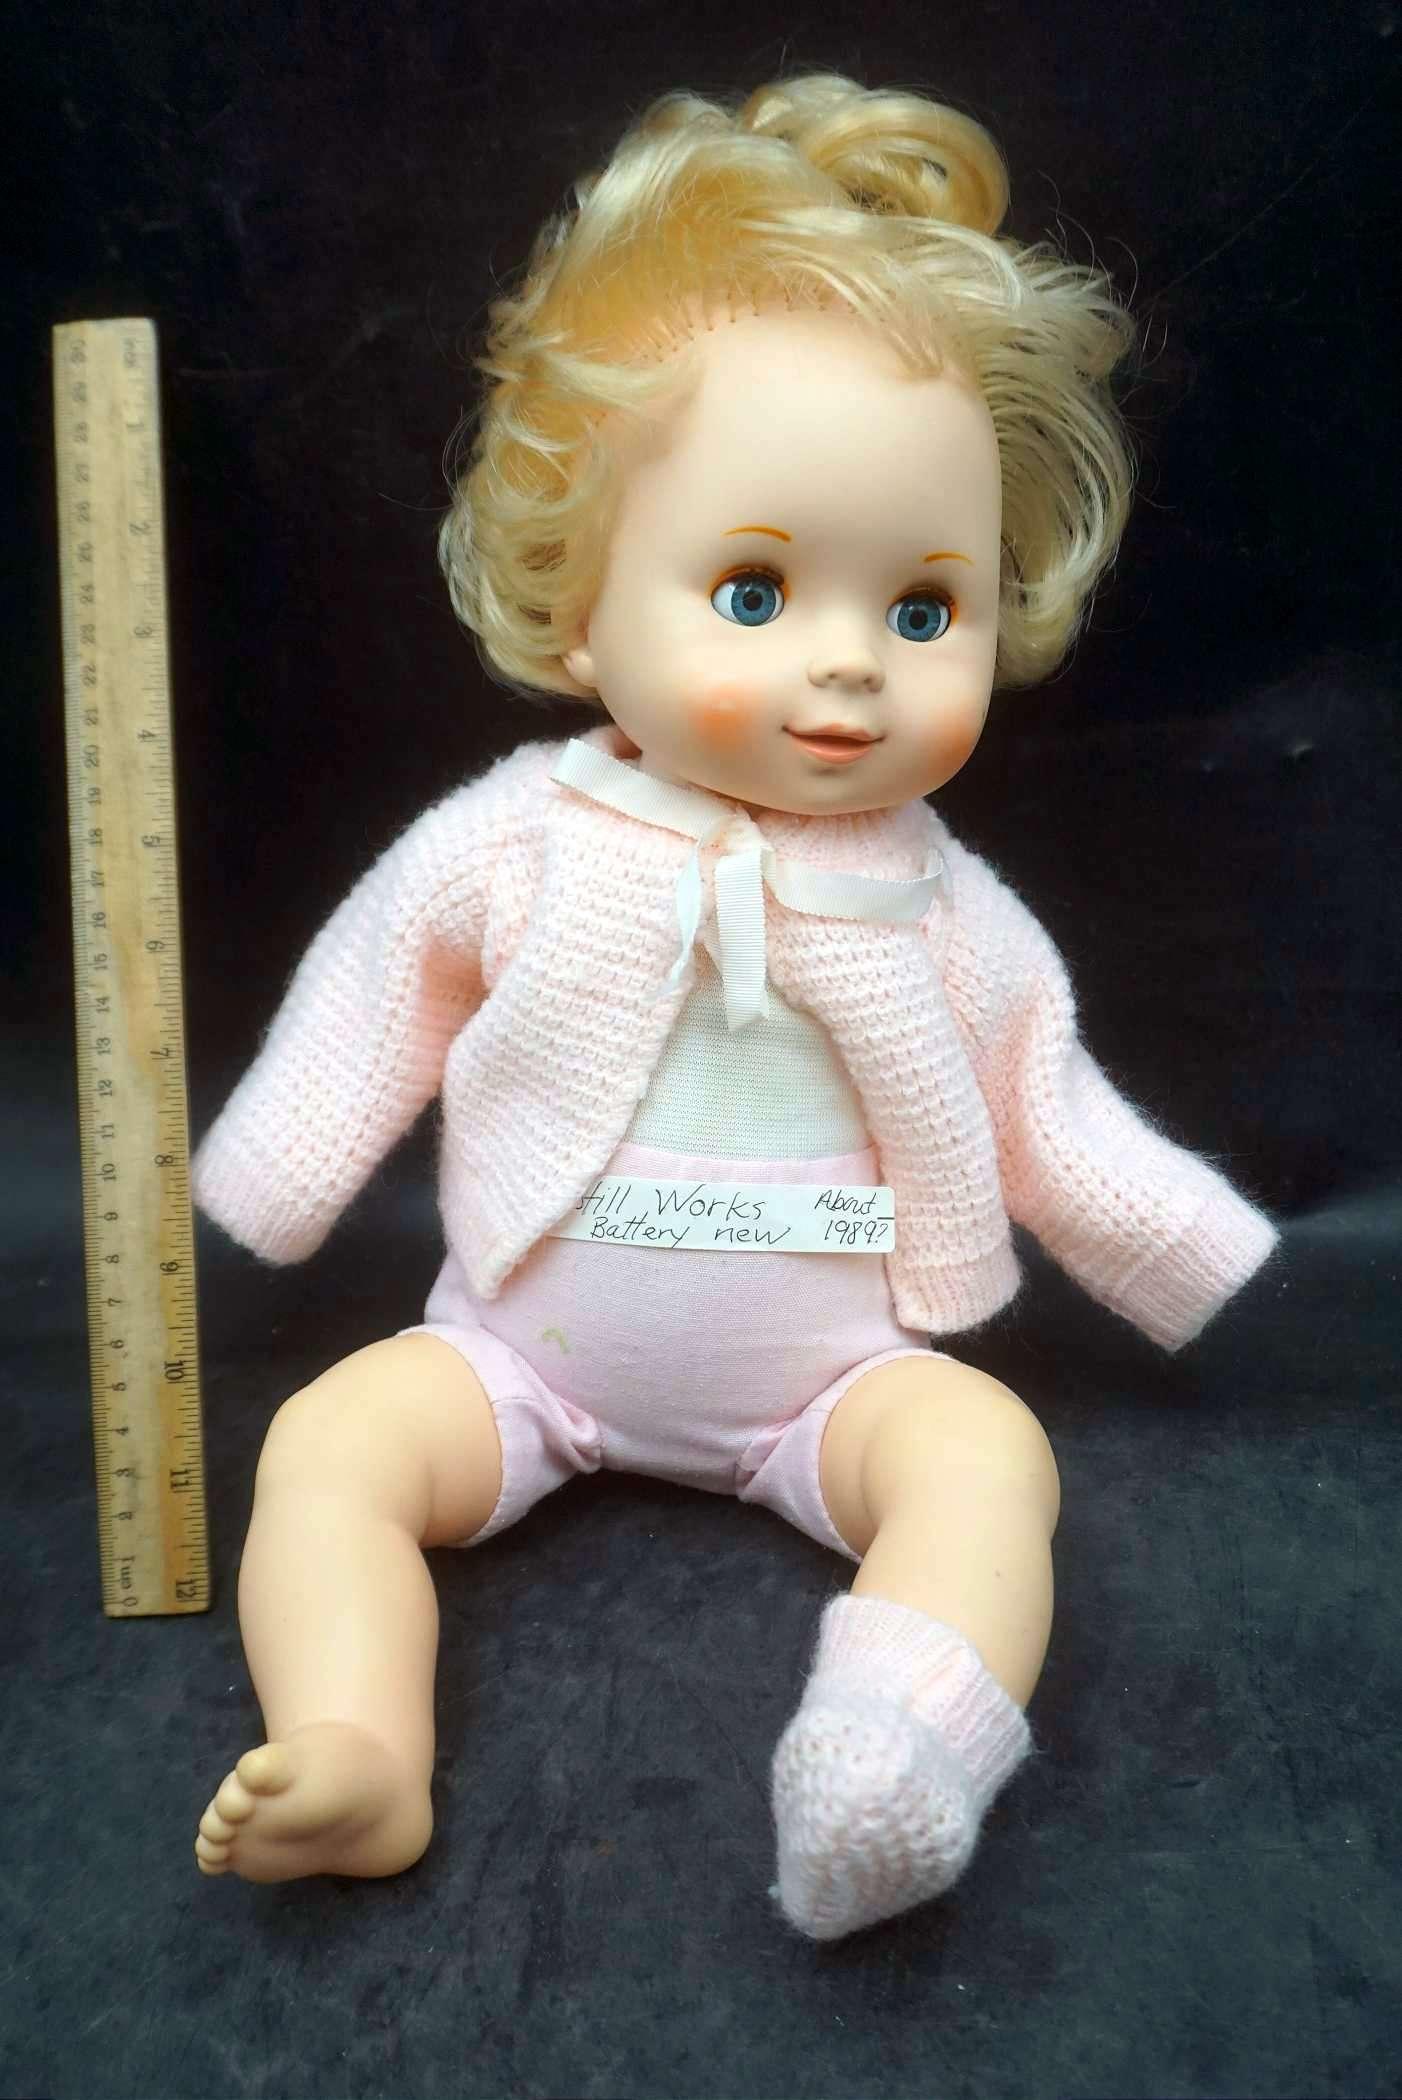 1989? Baby Doll - Still Works, Battery New